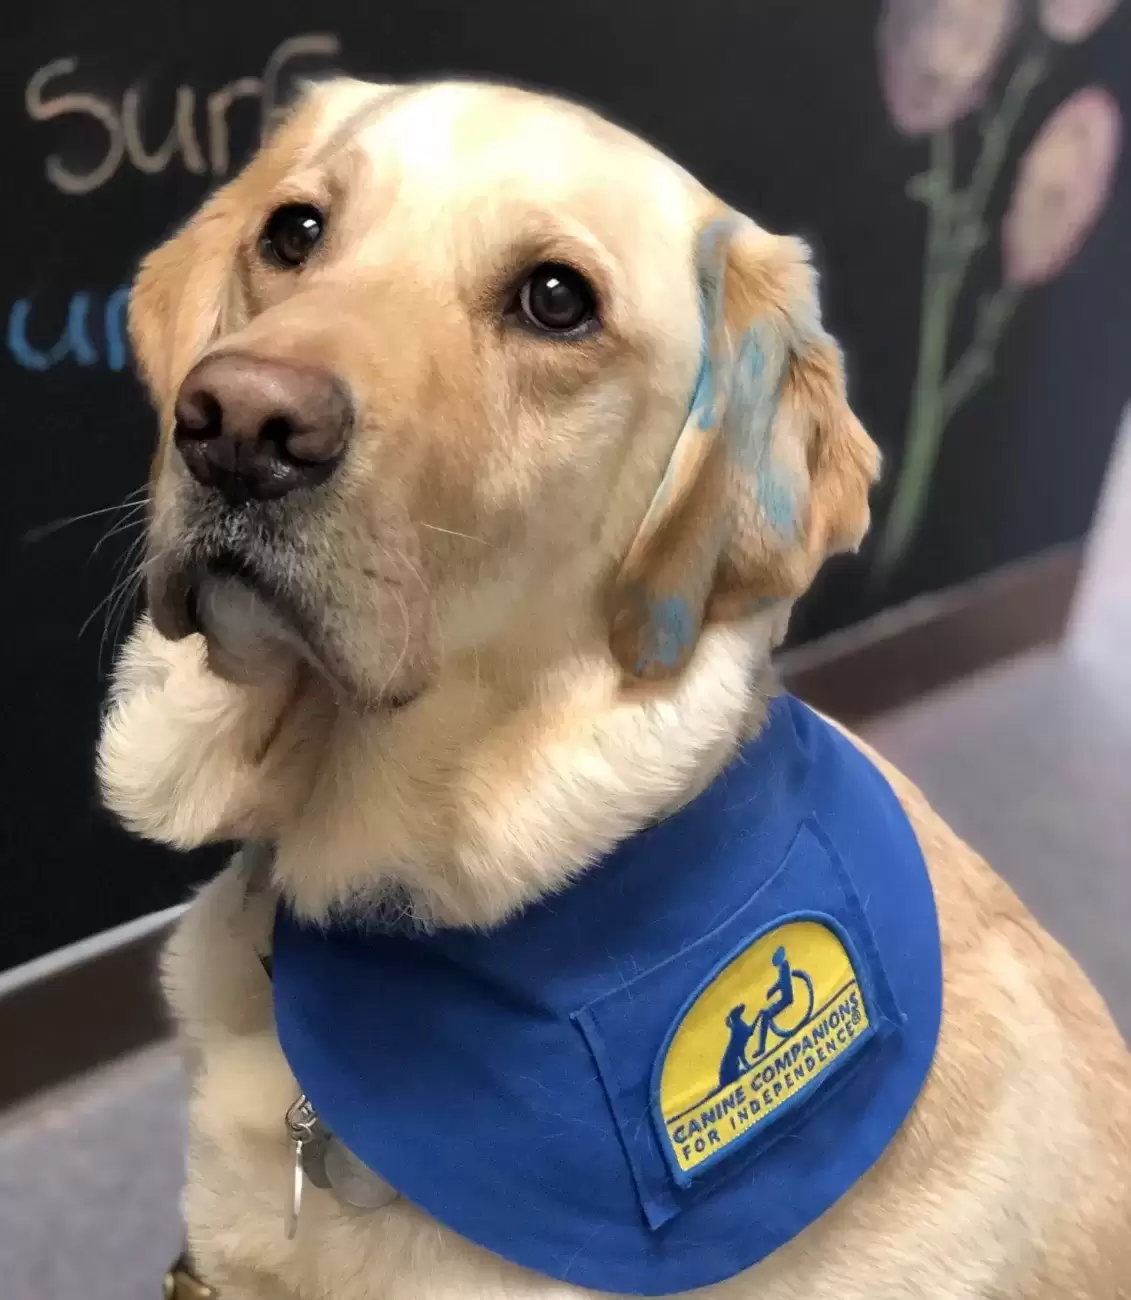 Service Dog working with foster kids in Virginia